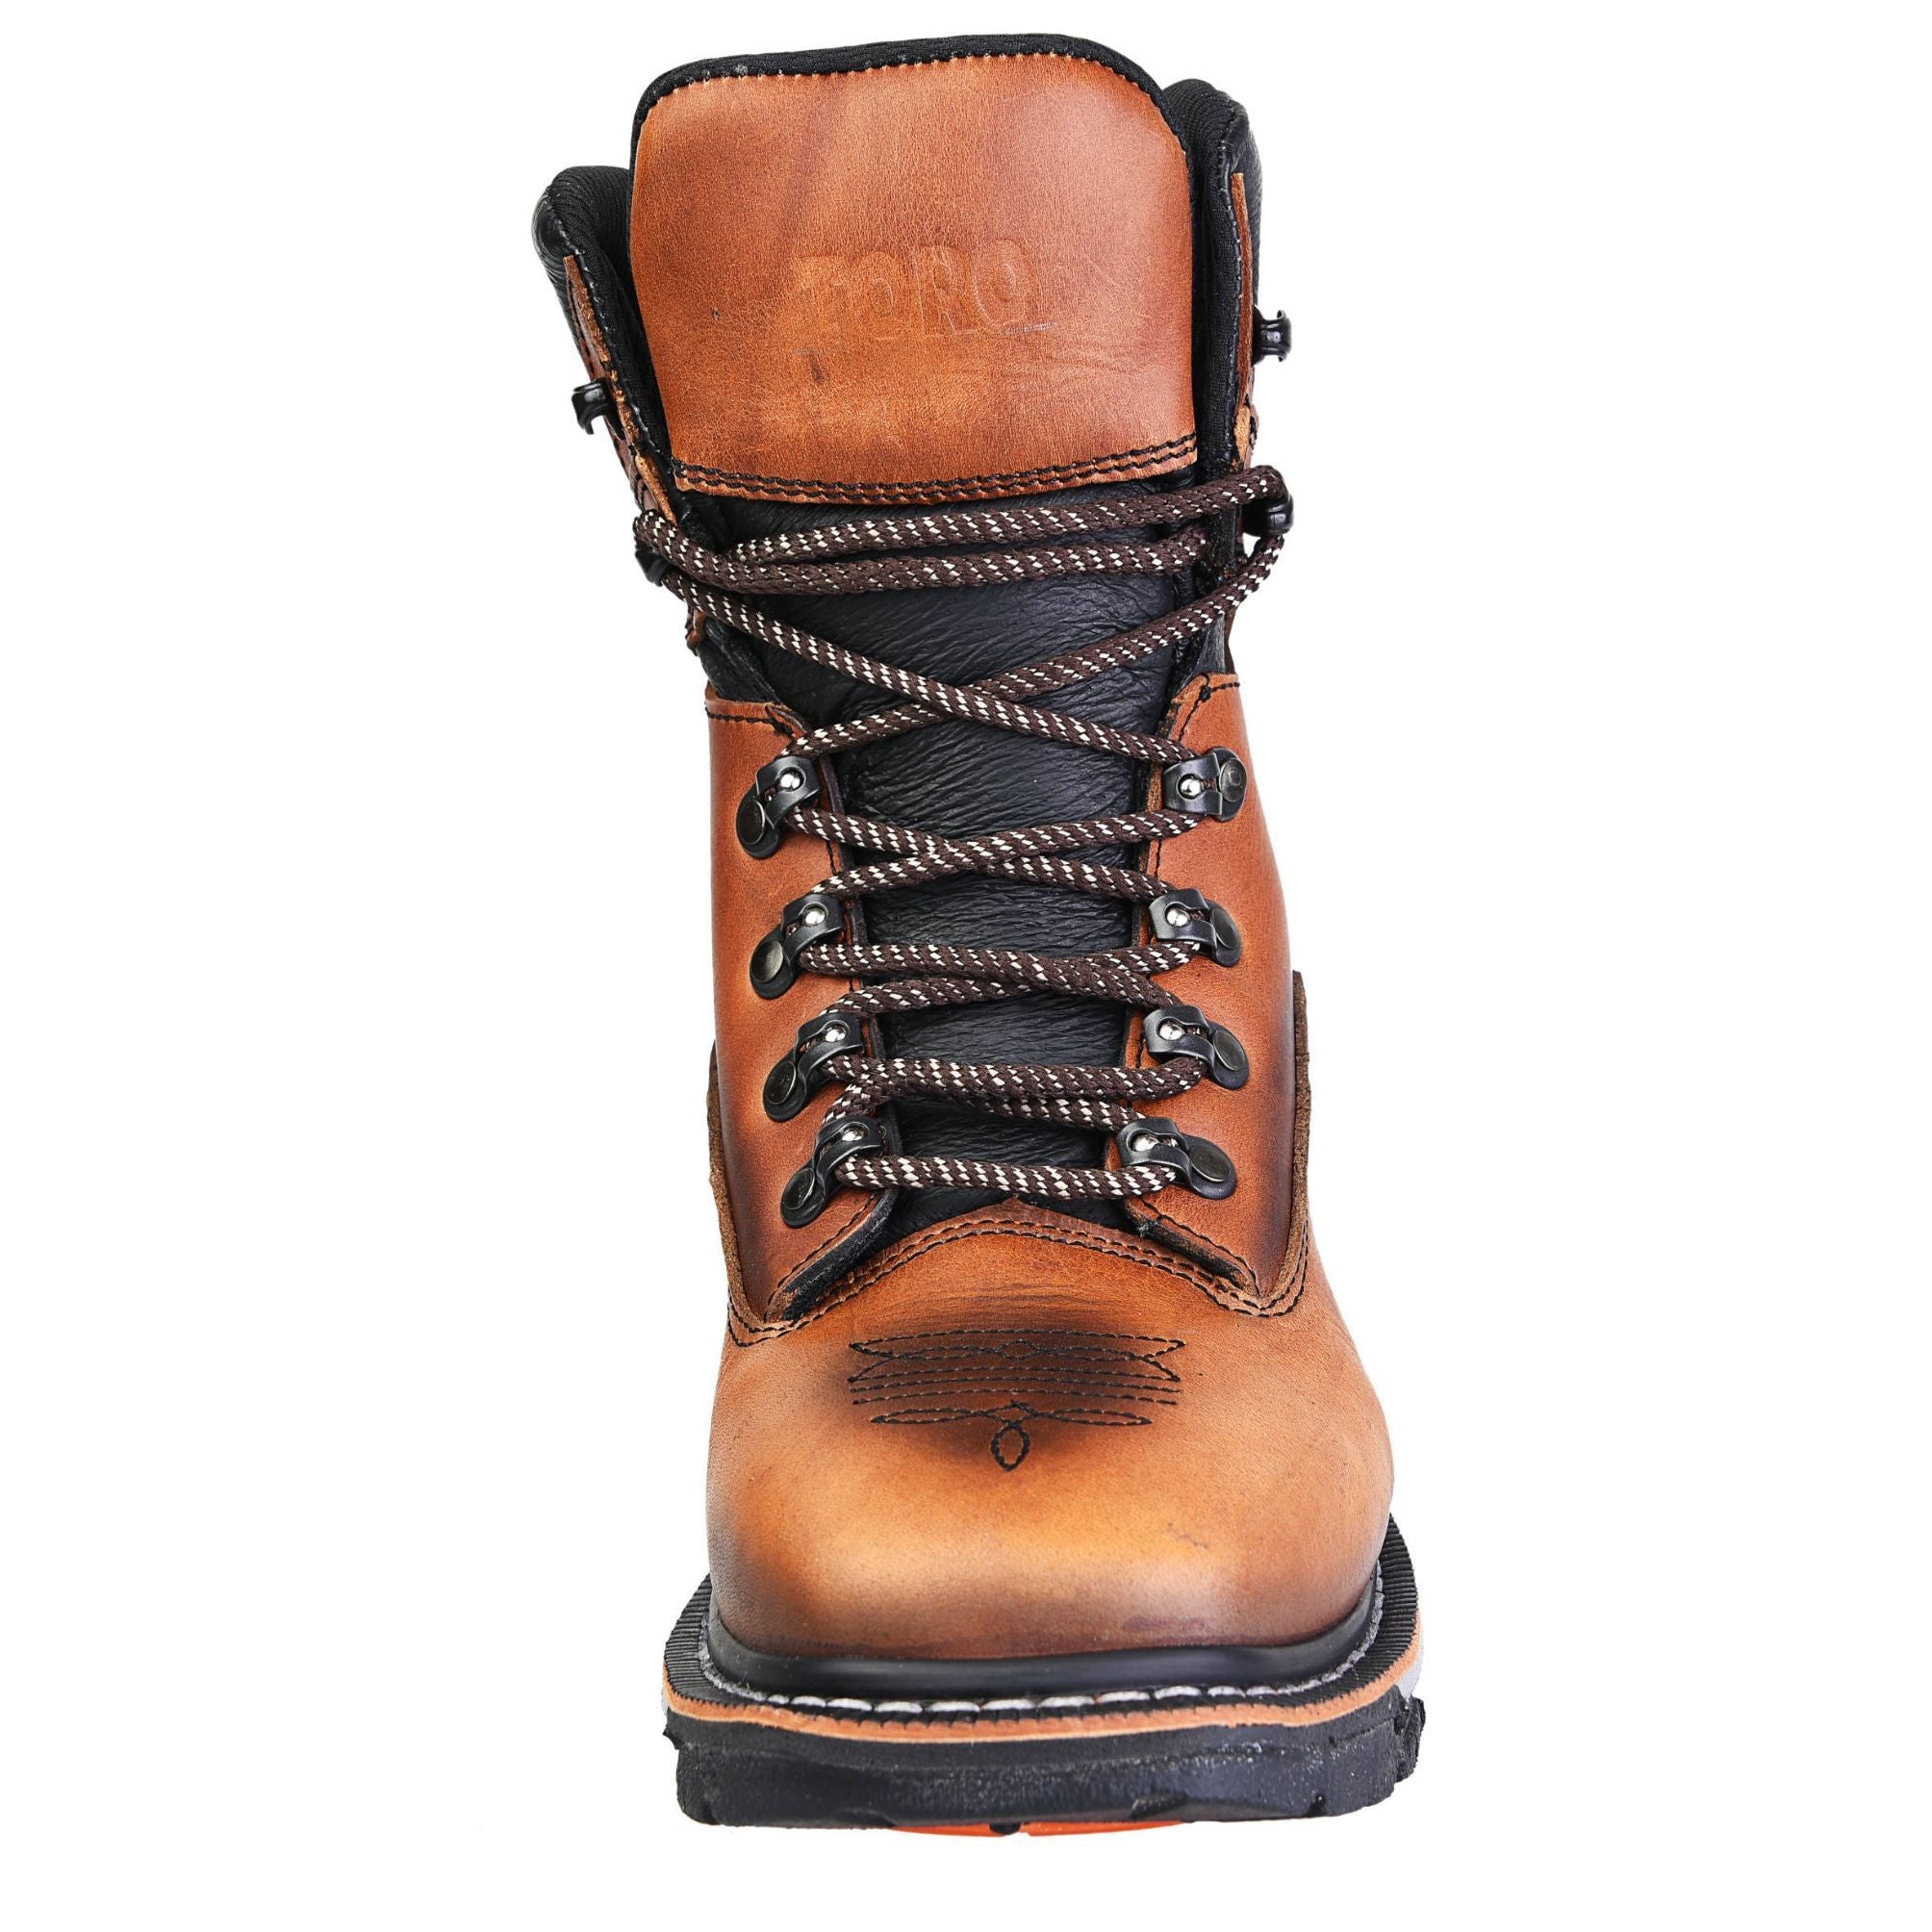 Men's Work Boots - 3-Layer Sole & Soft Toe - Tan Work Boots - Toro Bravo - 8" Work Boots - Tan 8in Work Boots